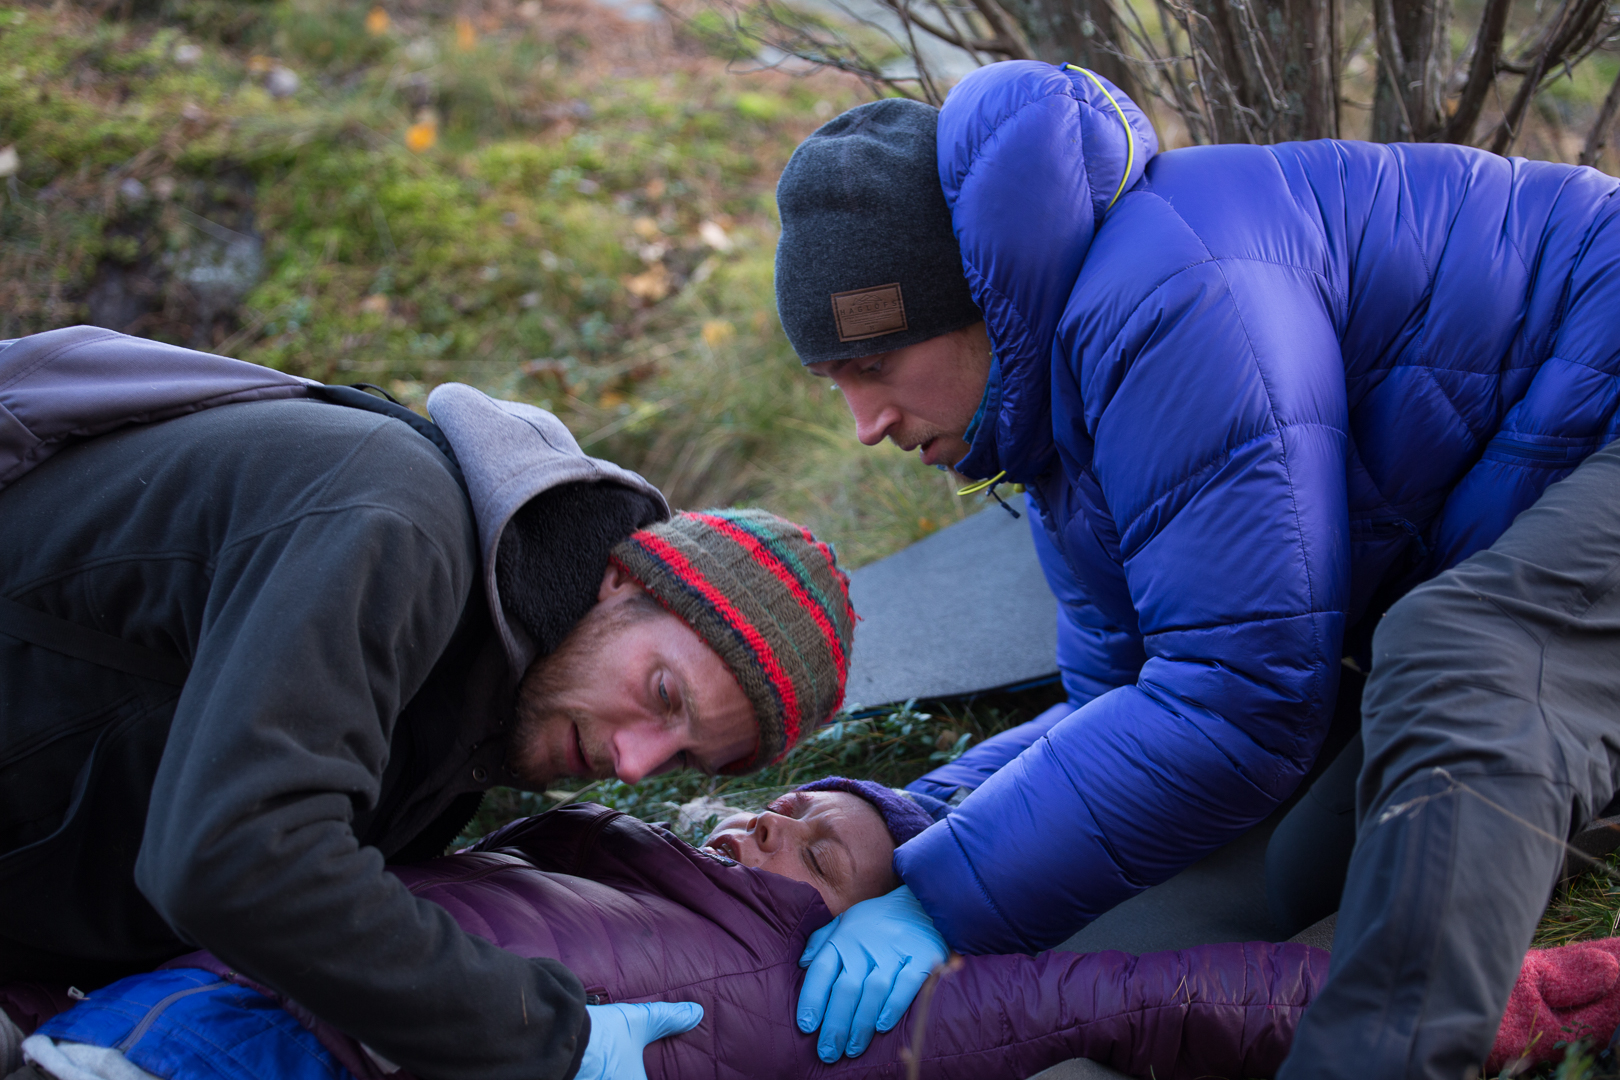 Two rescuers conduct a patient assessment on an unconscious patient